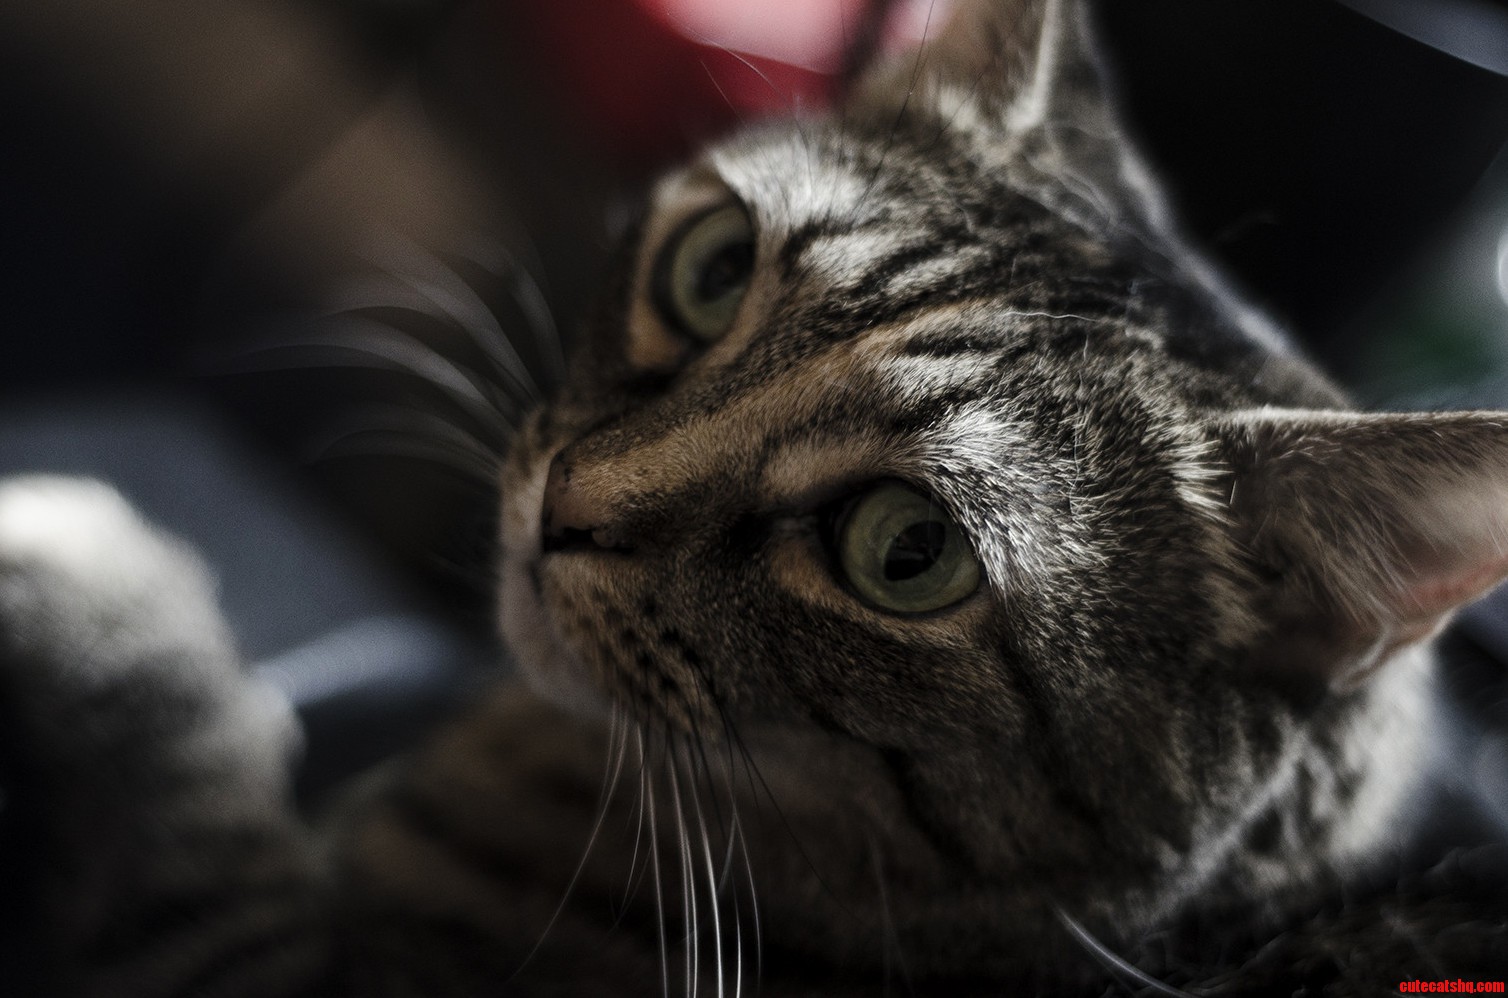 Testing Out My New 50Mm Lens On My Cat.